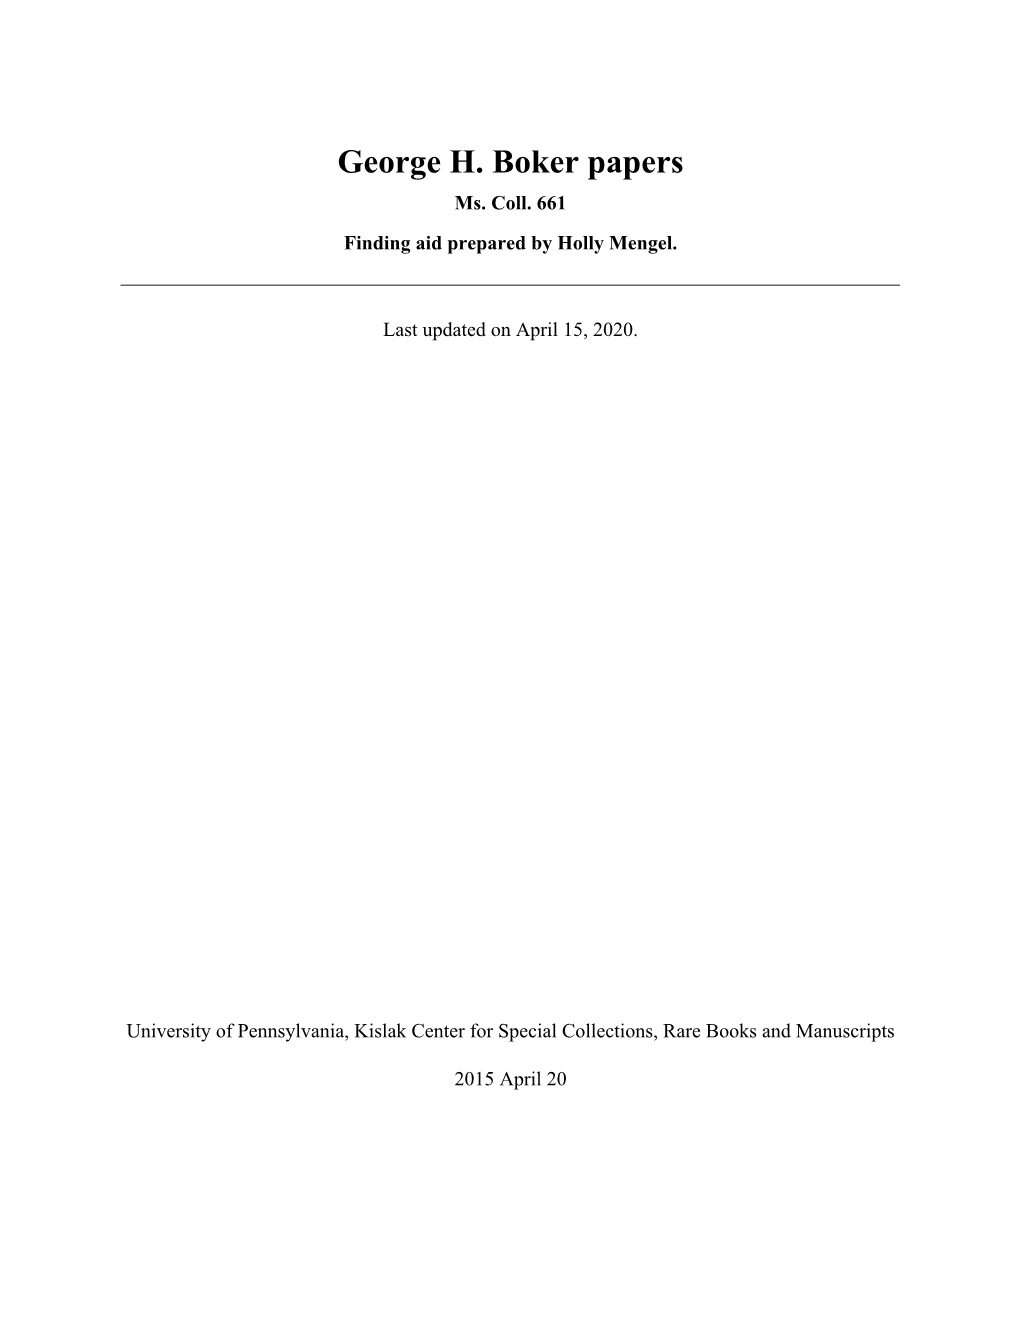 George H. Boker Papers Ms